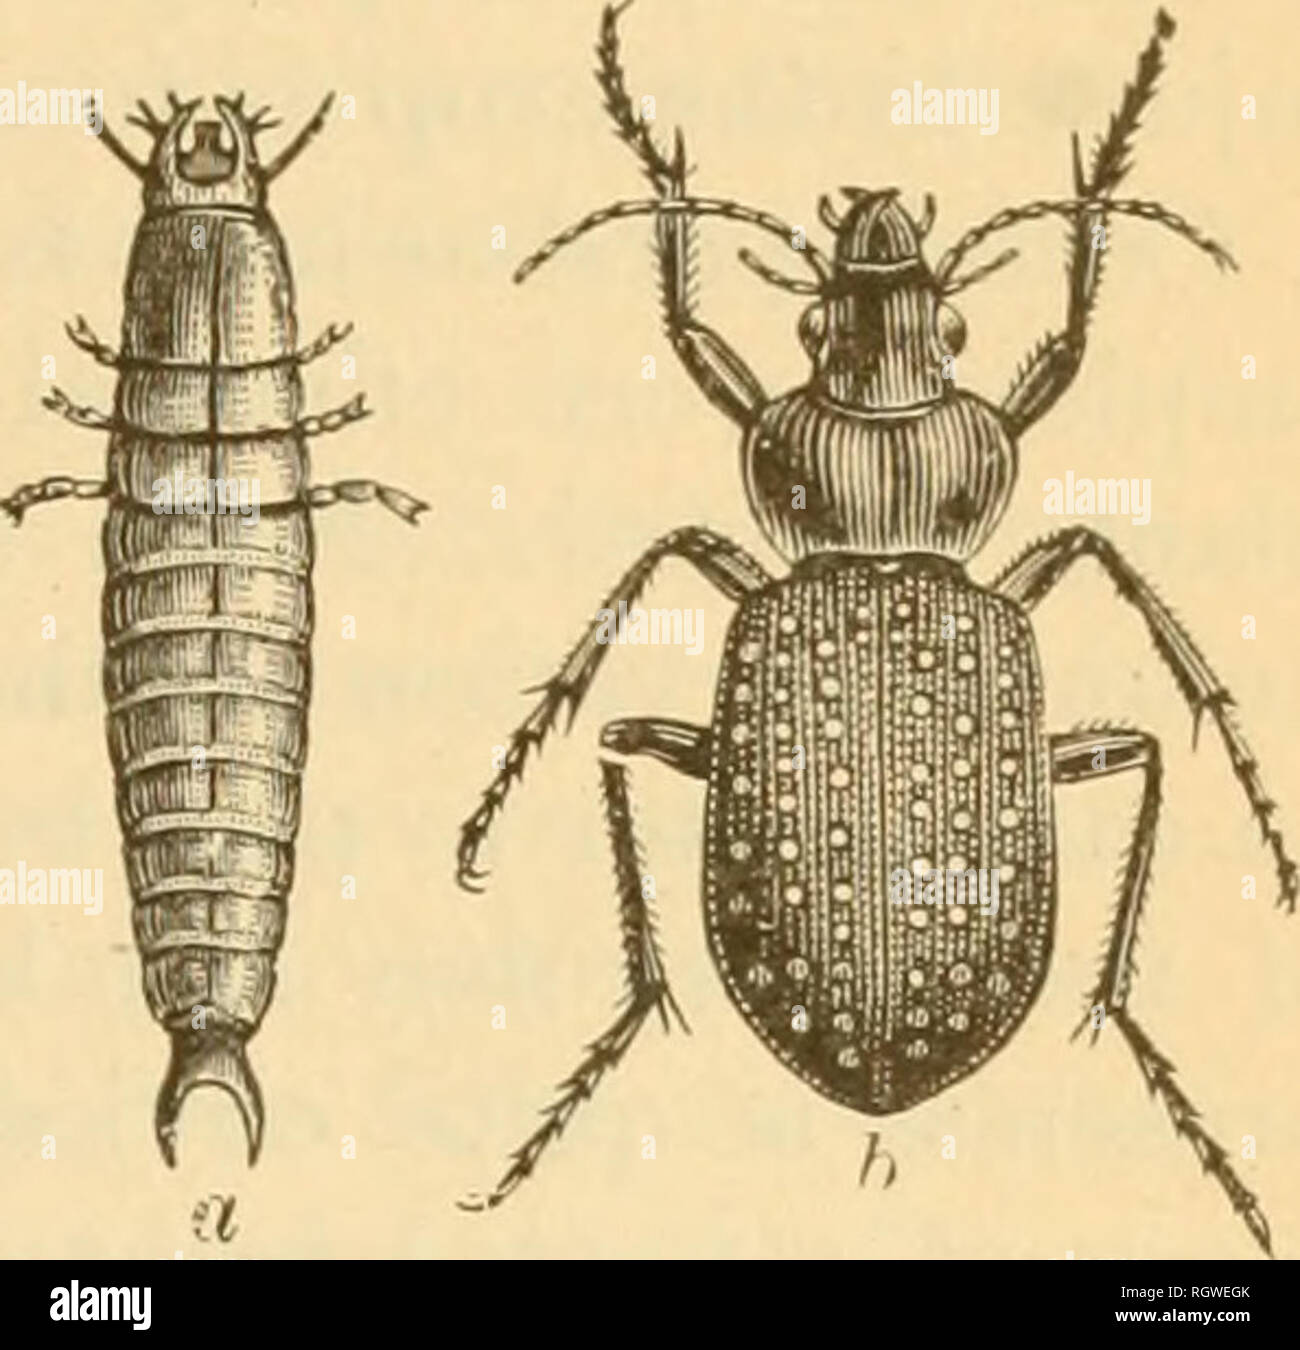 Bulletin Insects Insect Pests Entomology Insects Insect Pests